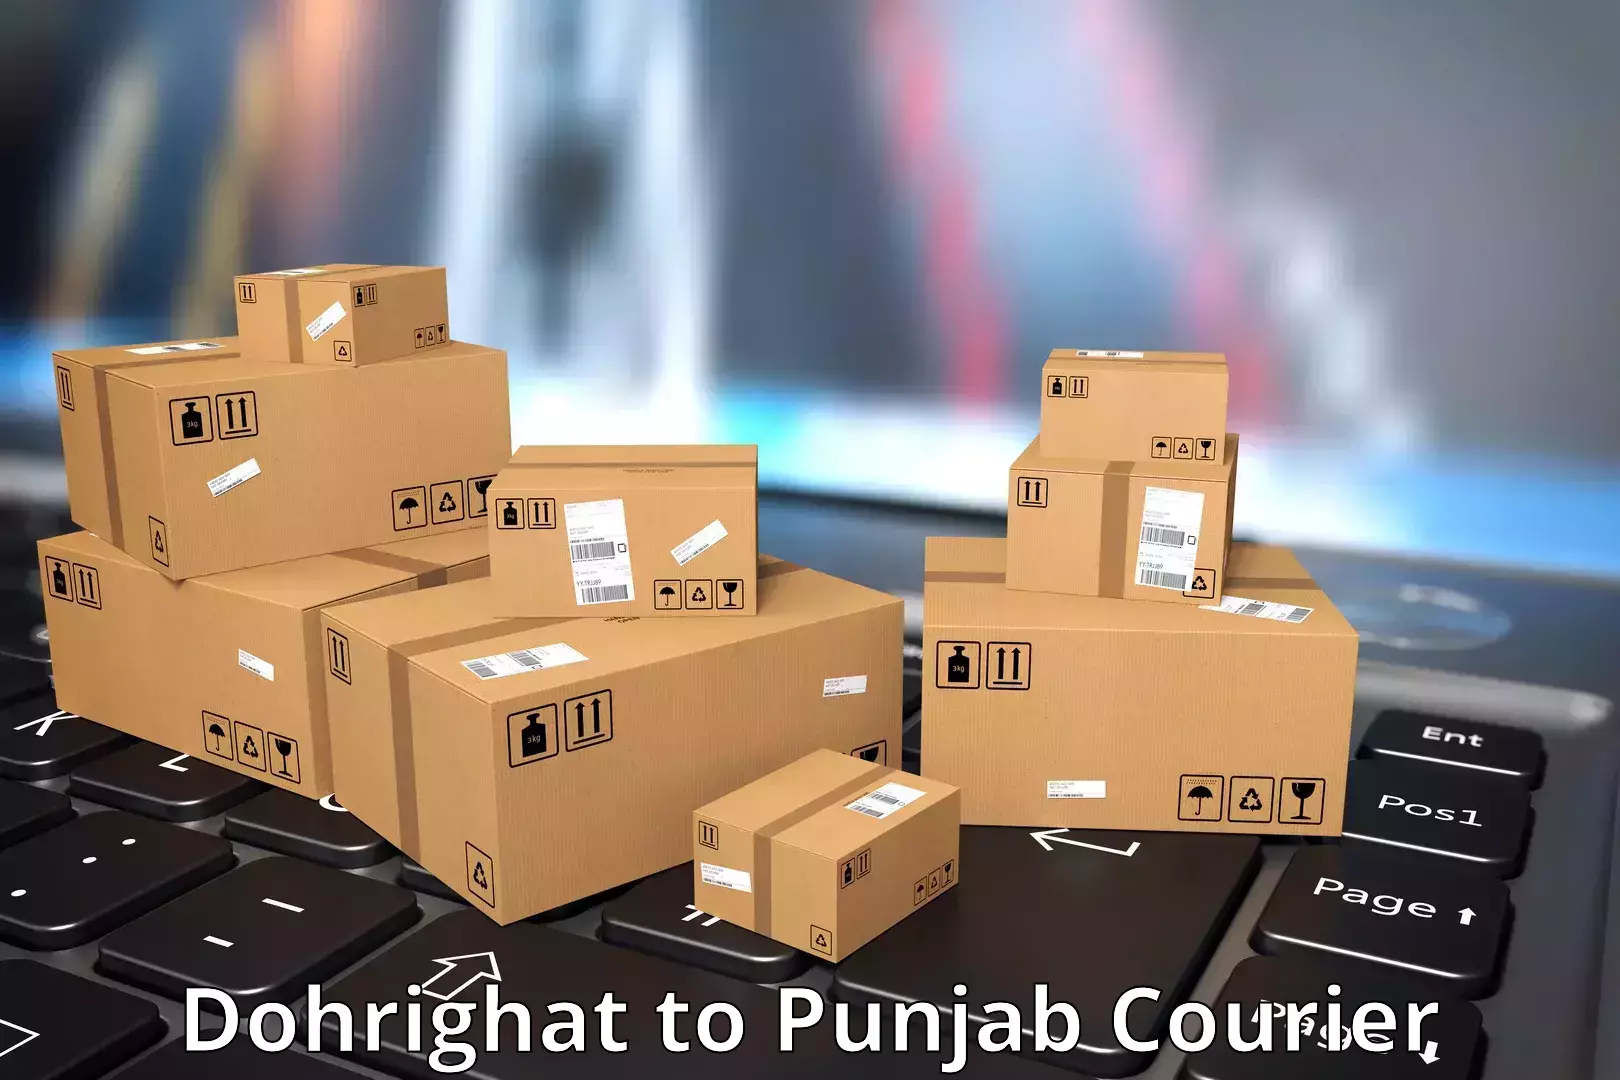 Tailored shipping services Dohrighat to Sirhind Fatehgarh